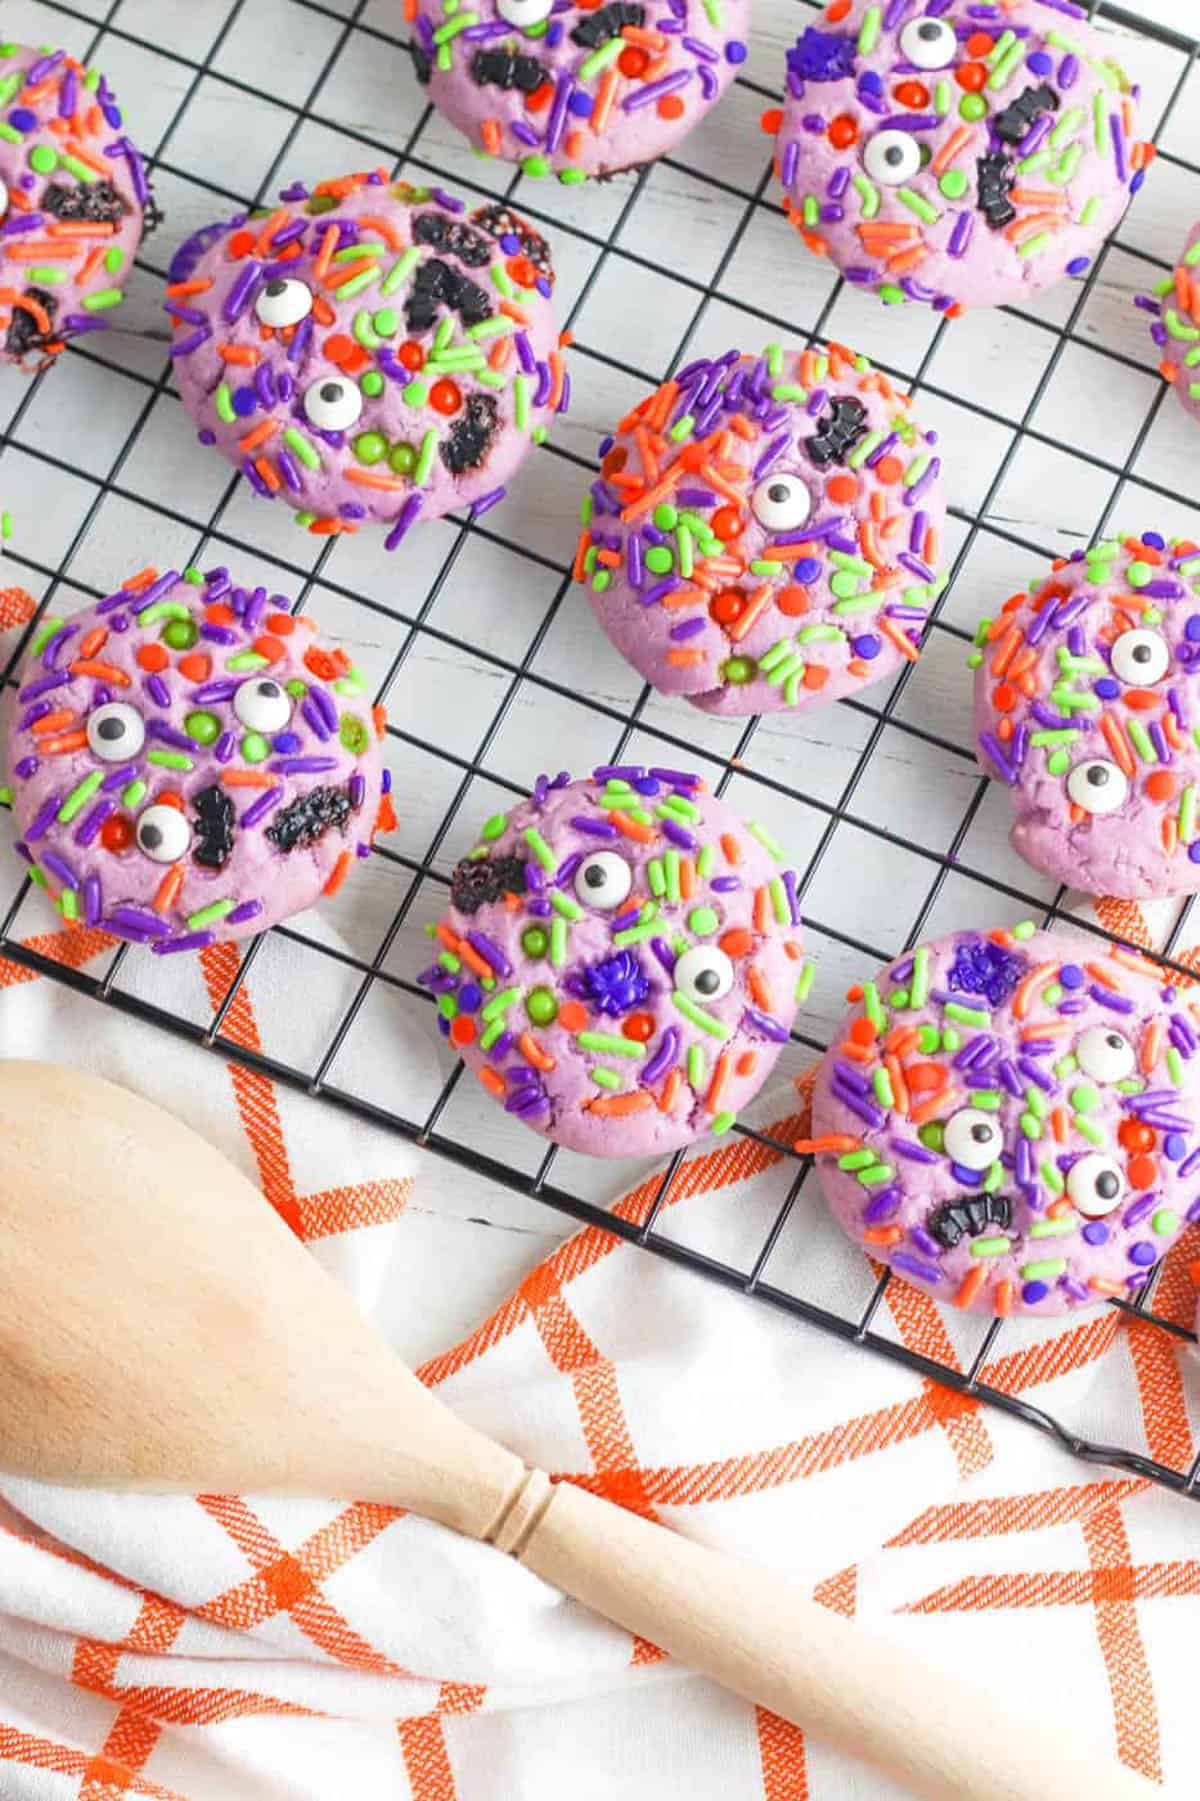 Purple Halloween monster cookies with googley eyes cooling on a wire rack.